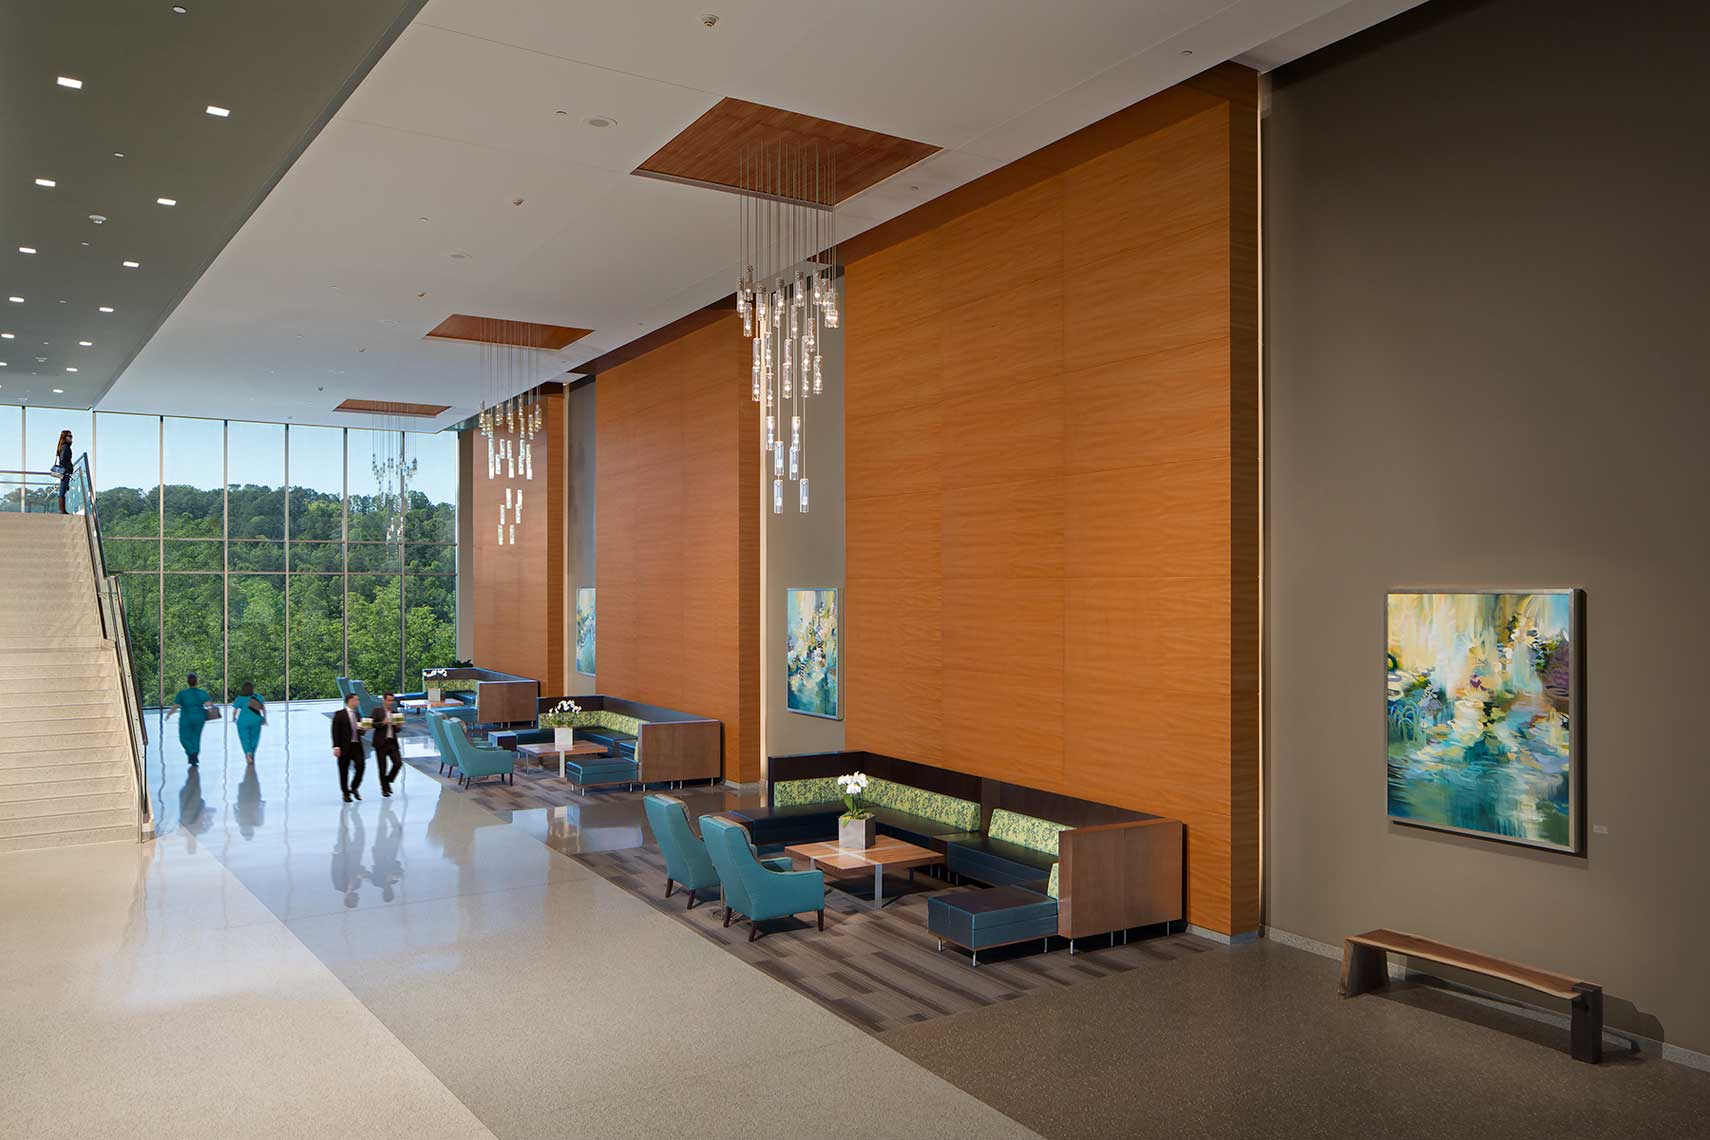 A calming image of the Northside Hospital Cherokee Hospital waiting area in Canton Georgia